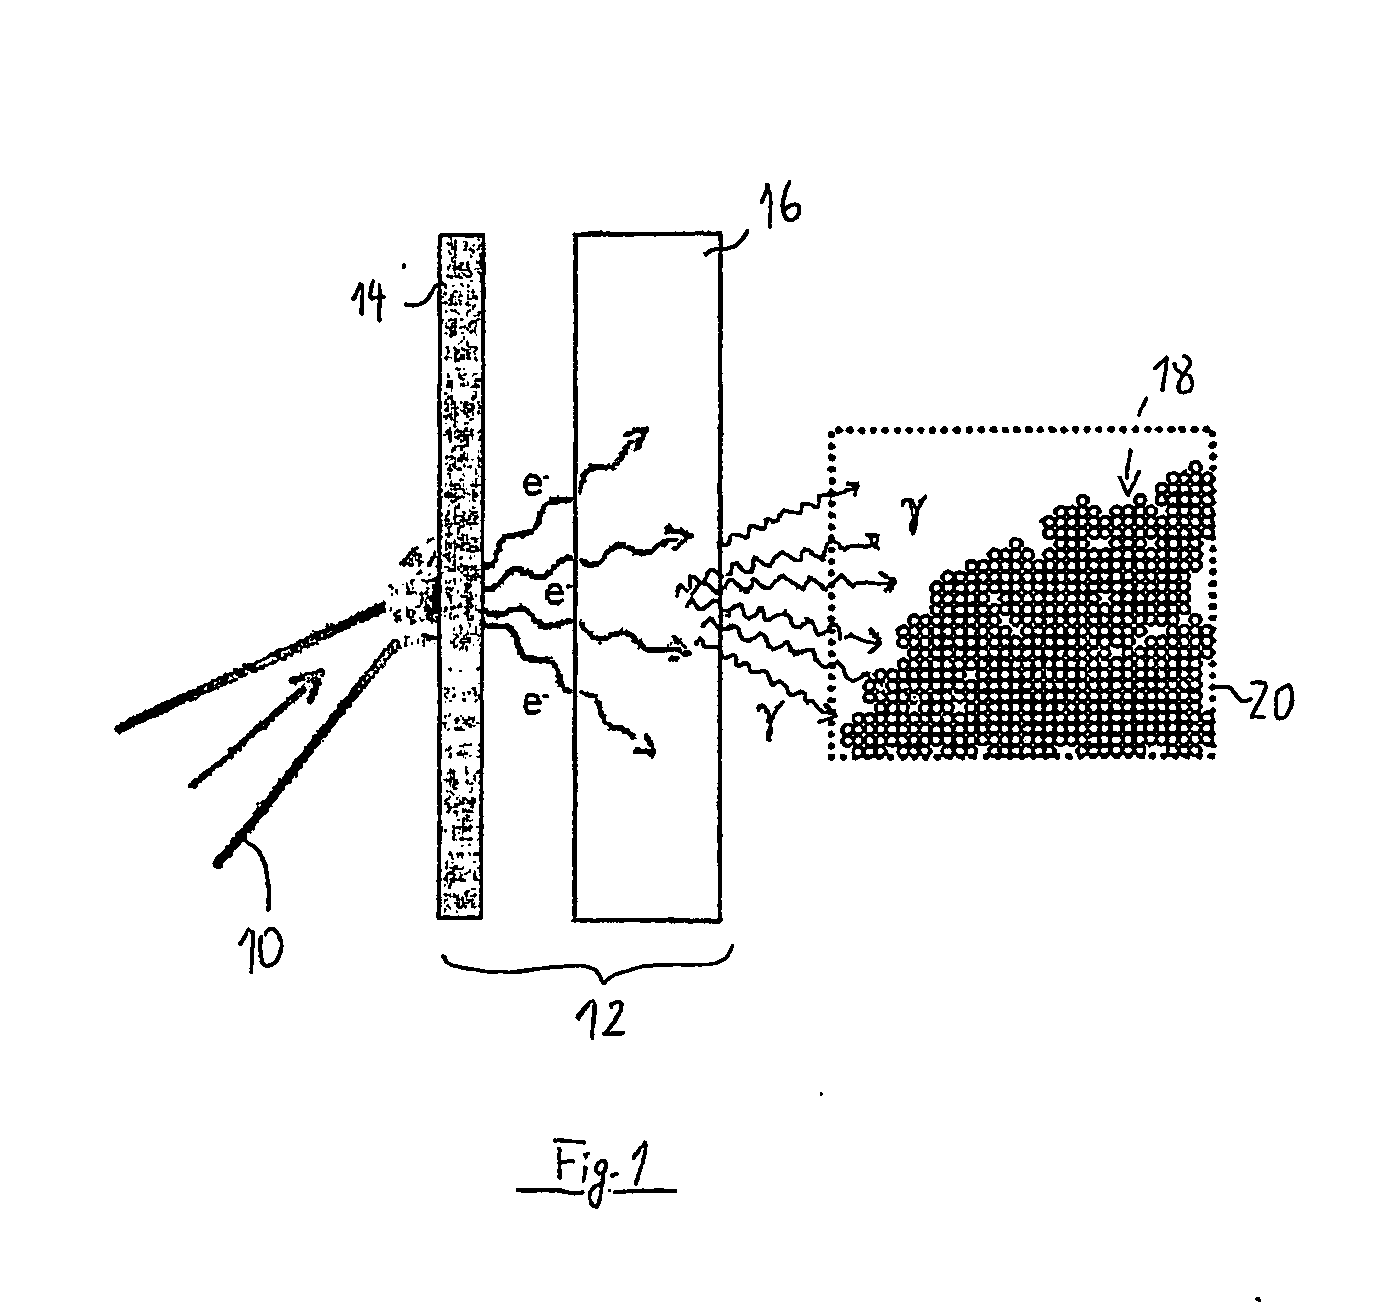 Activation and production of radiolabeled particles